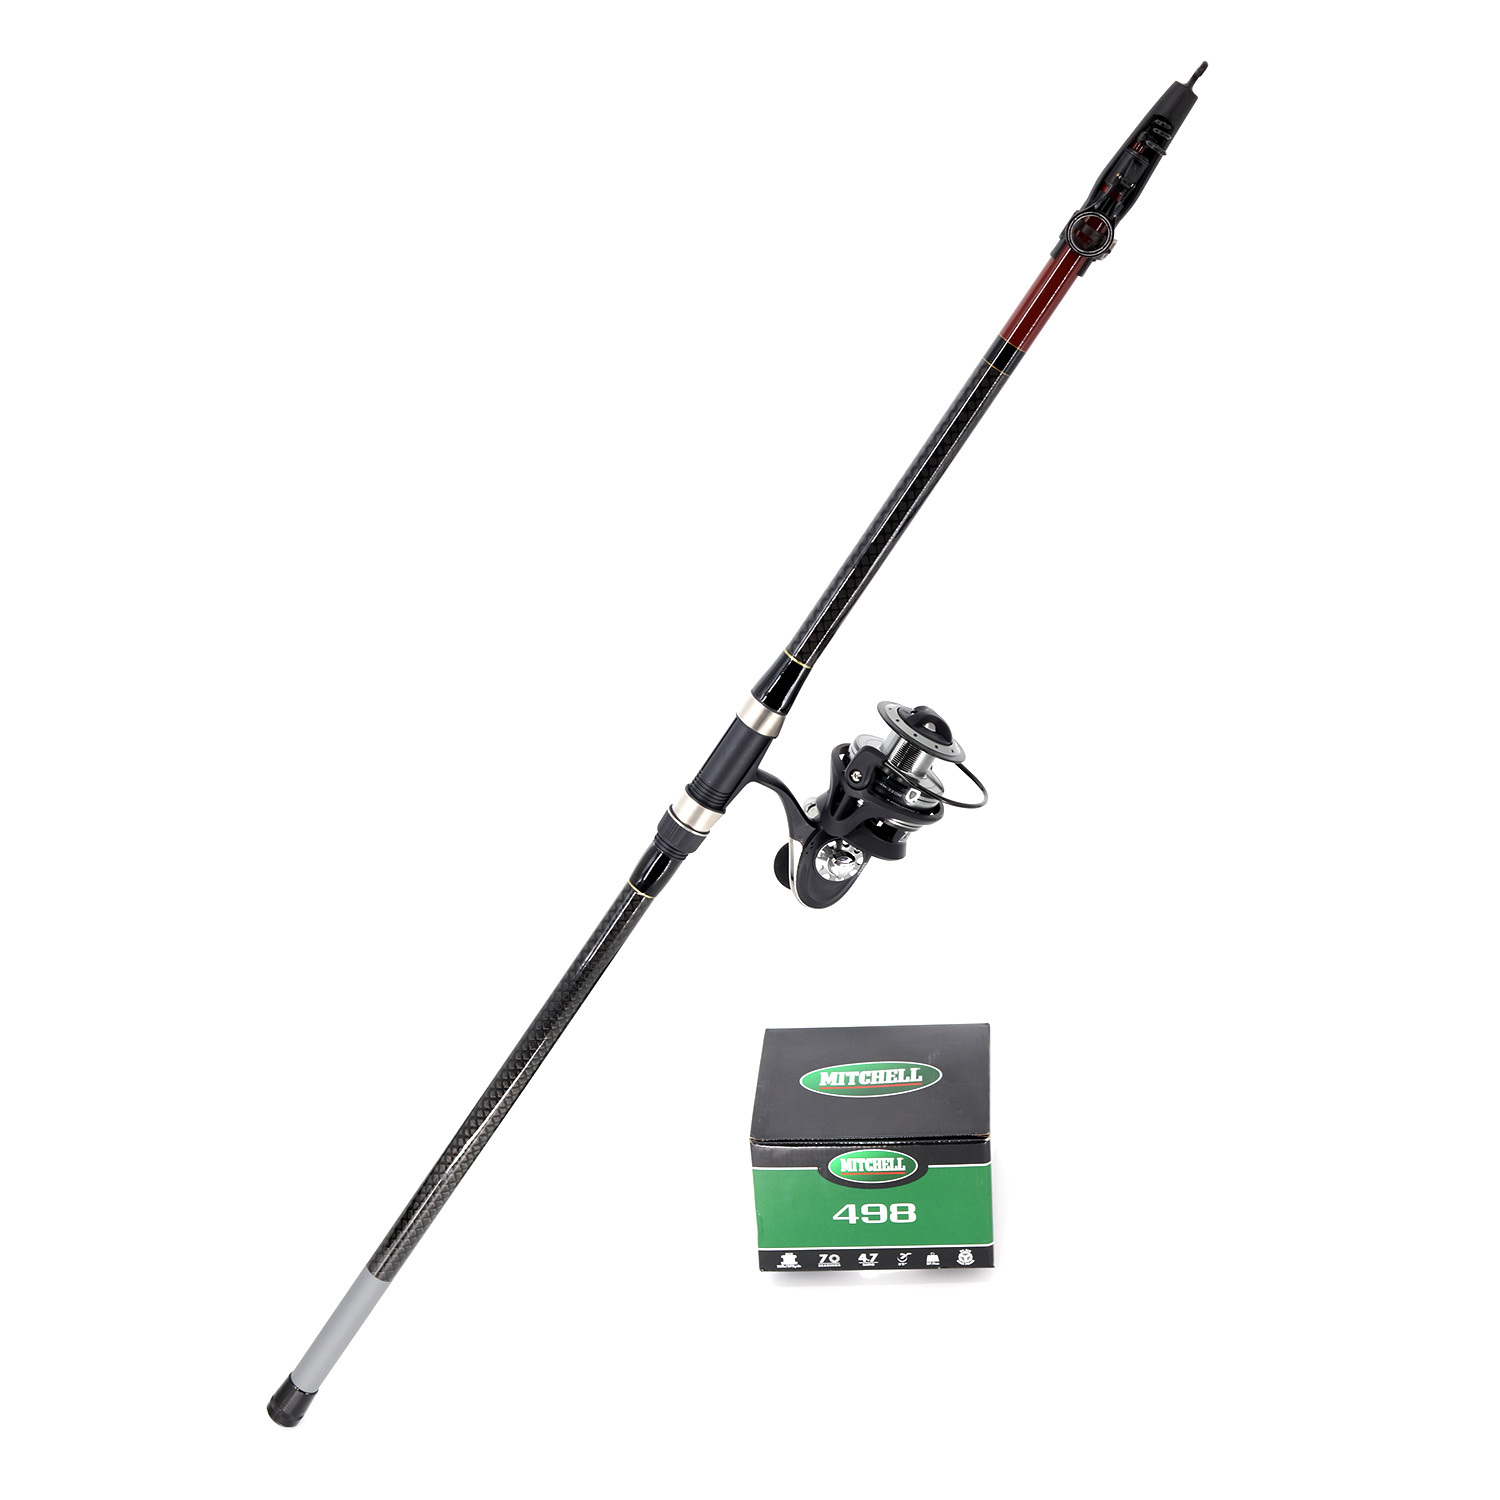 Shore Fishing (Pilot 4.5m and Mitchell 498 and snap swivels) Combo